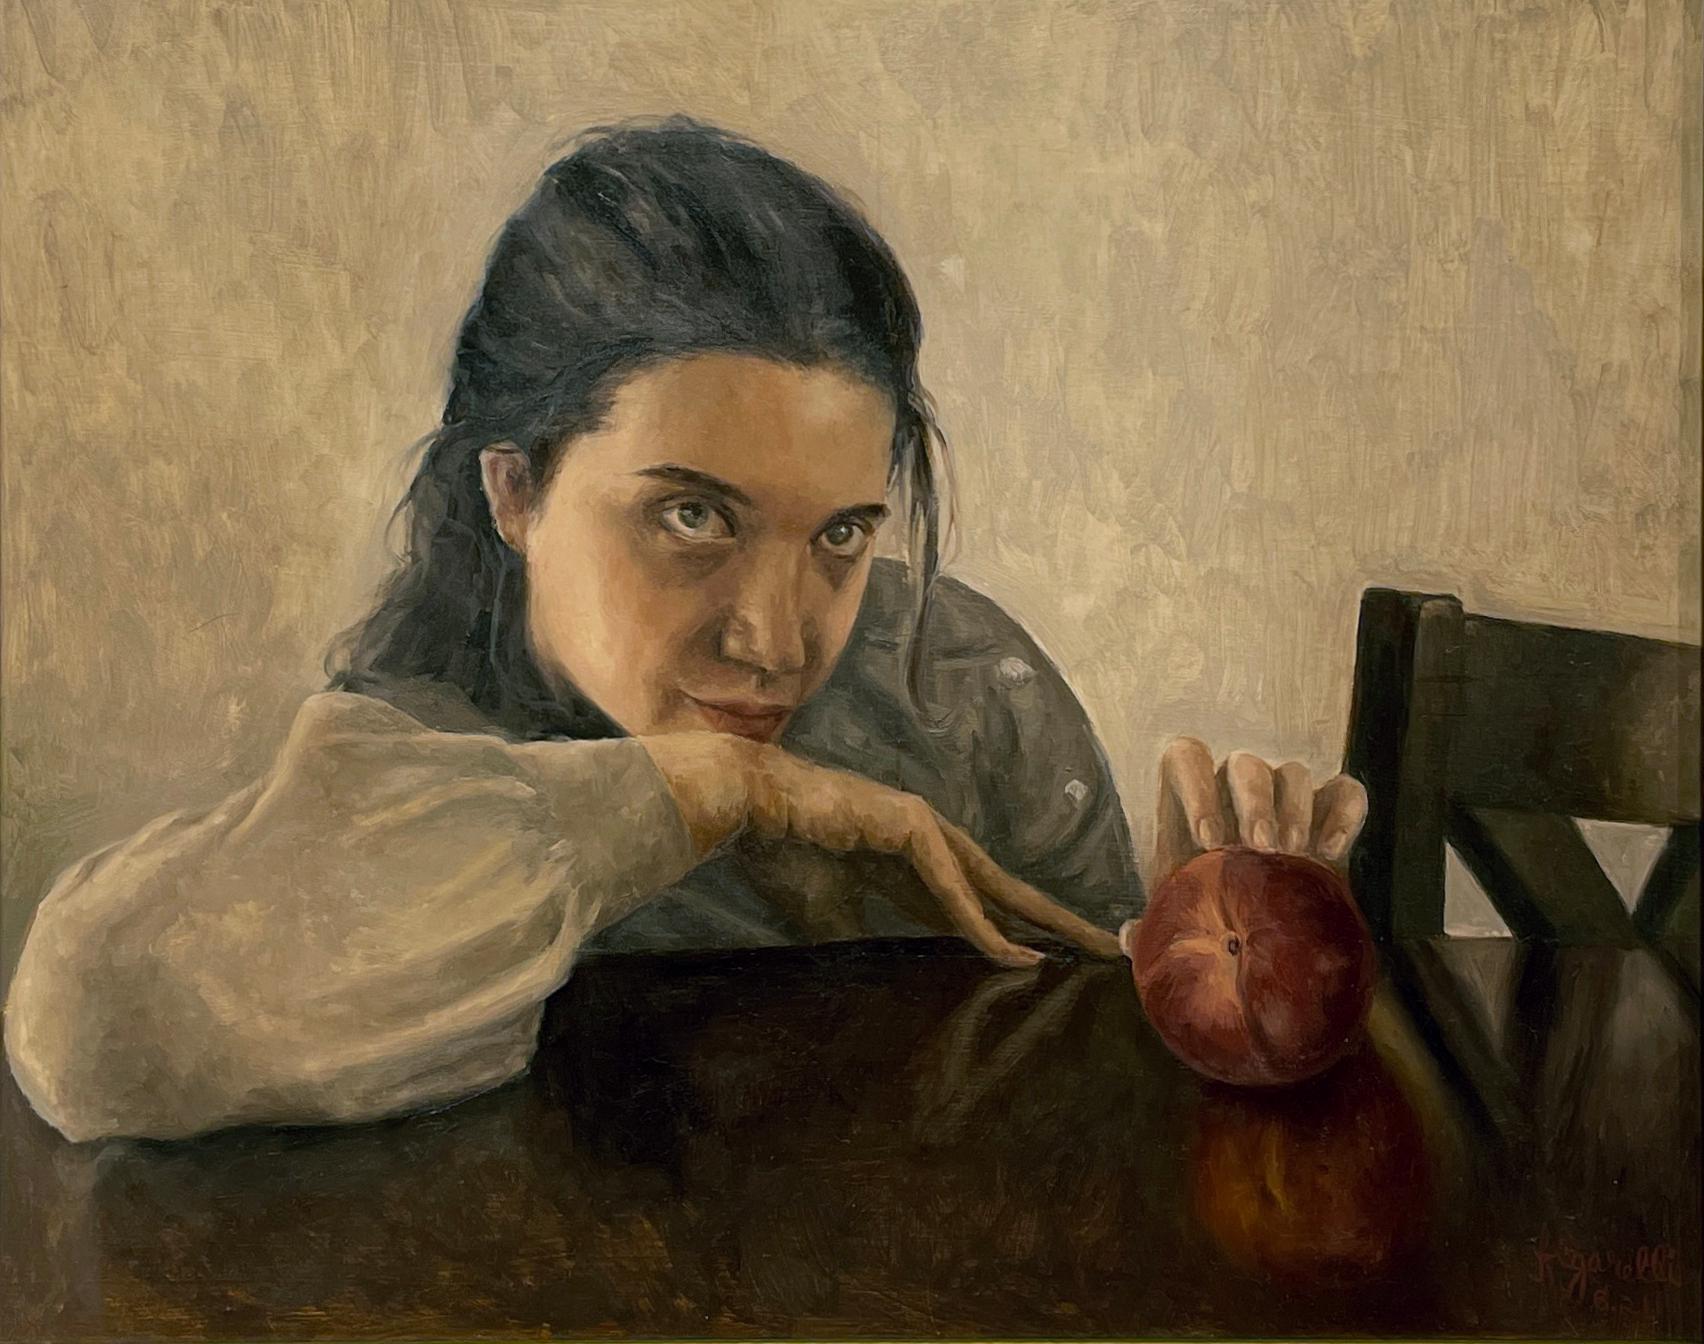 The Agreement - Contemplative Female Figure with Fruit, Oil on Panel, Framed - Painting by Tina Figarelli